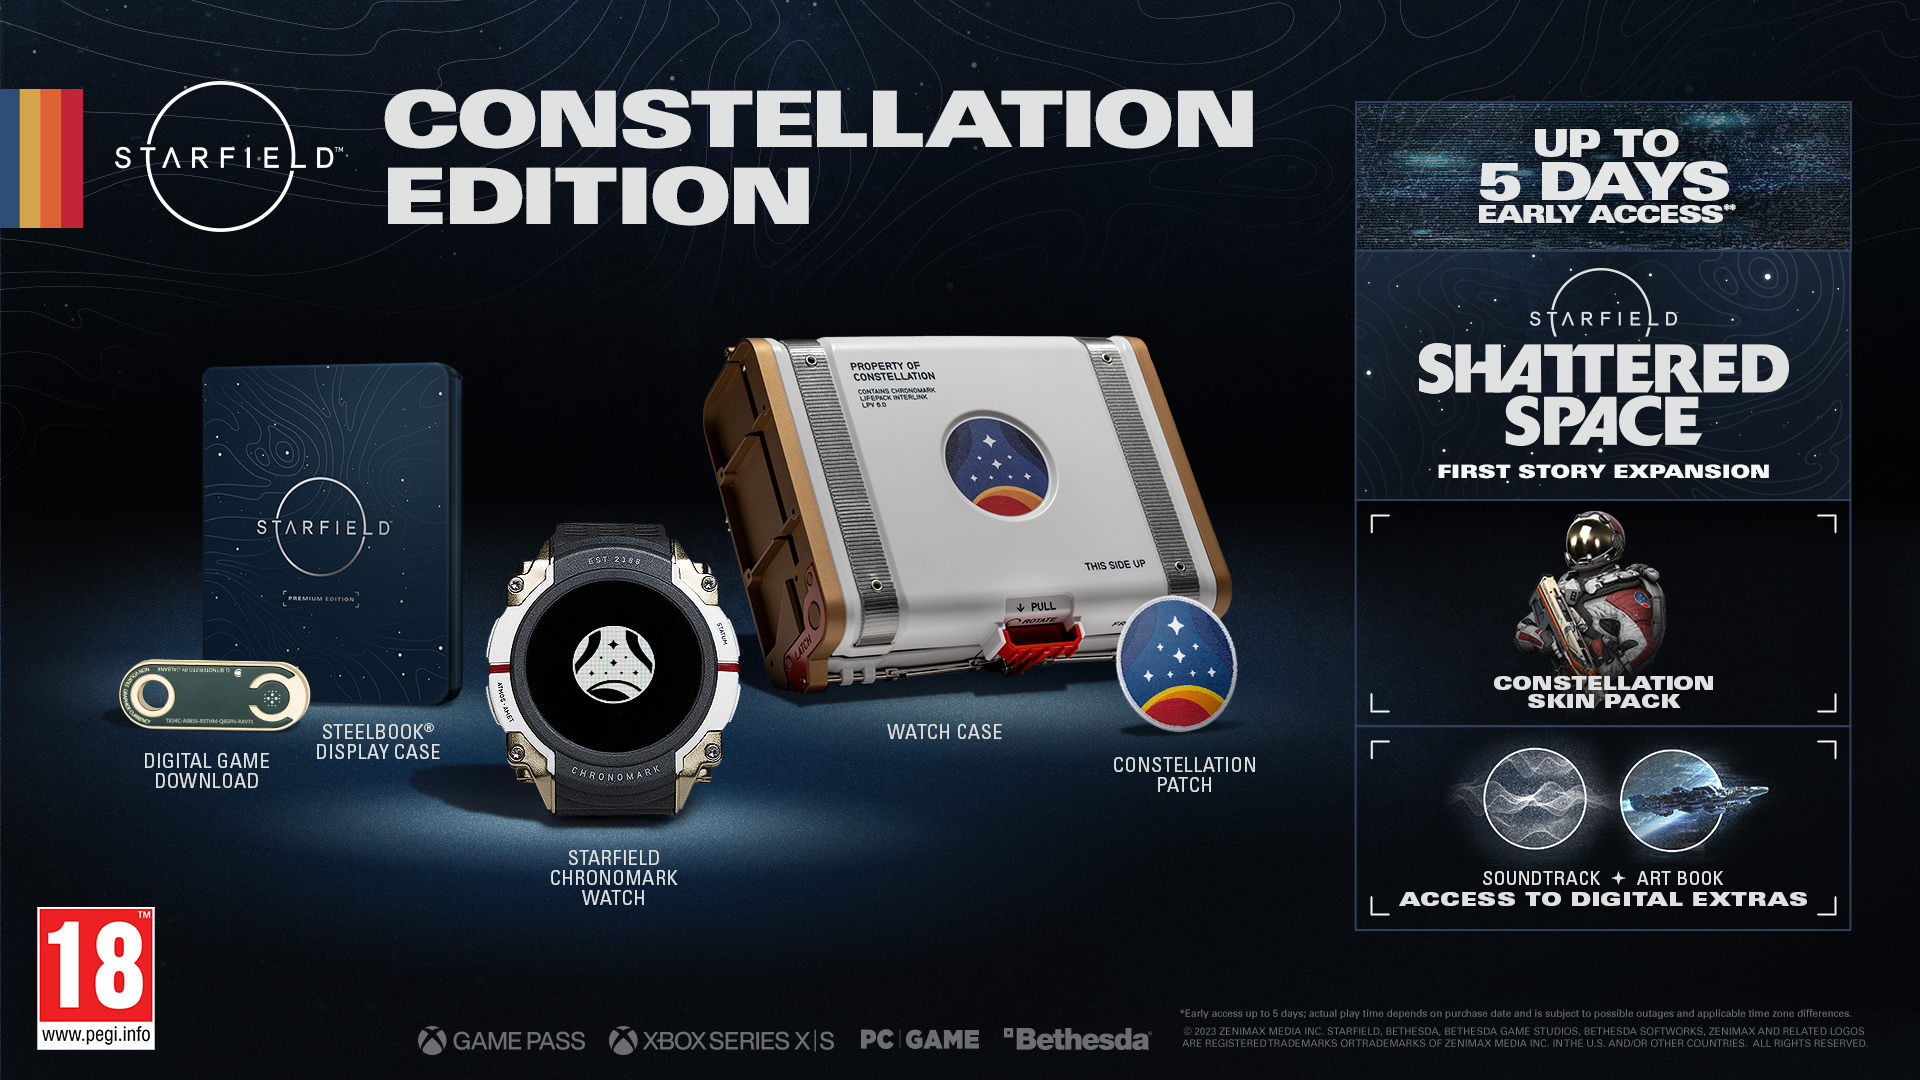 Starfield Constellation Edition Review: What Do You Get For Your Money?